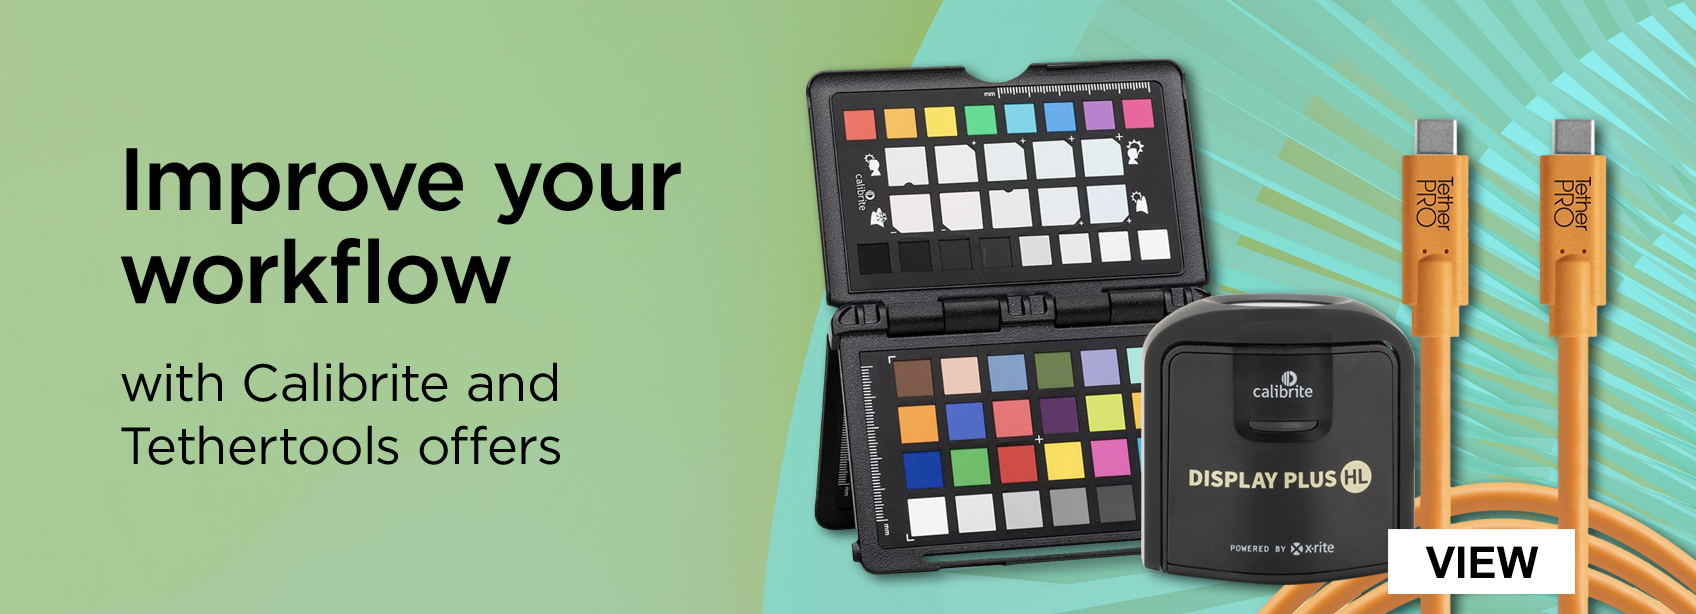 Improve your workflow with Calibrite and Tethertools offers